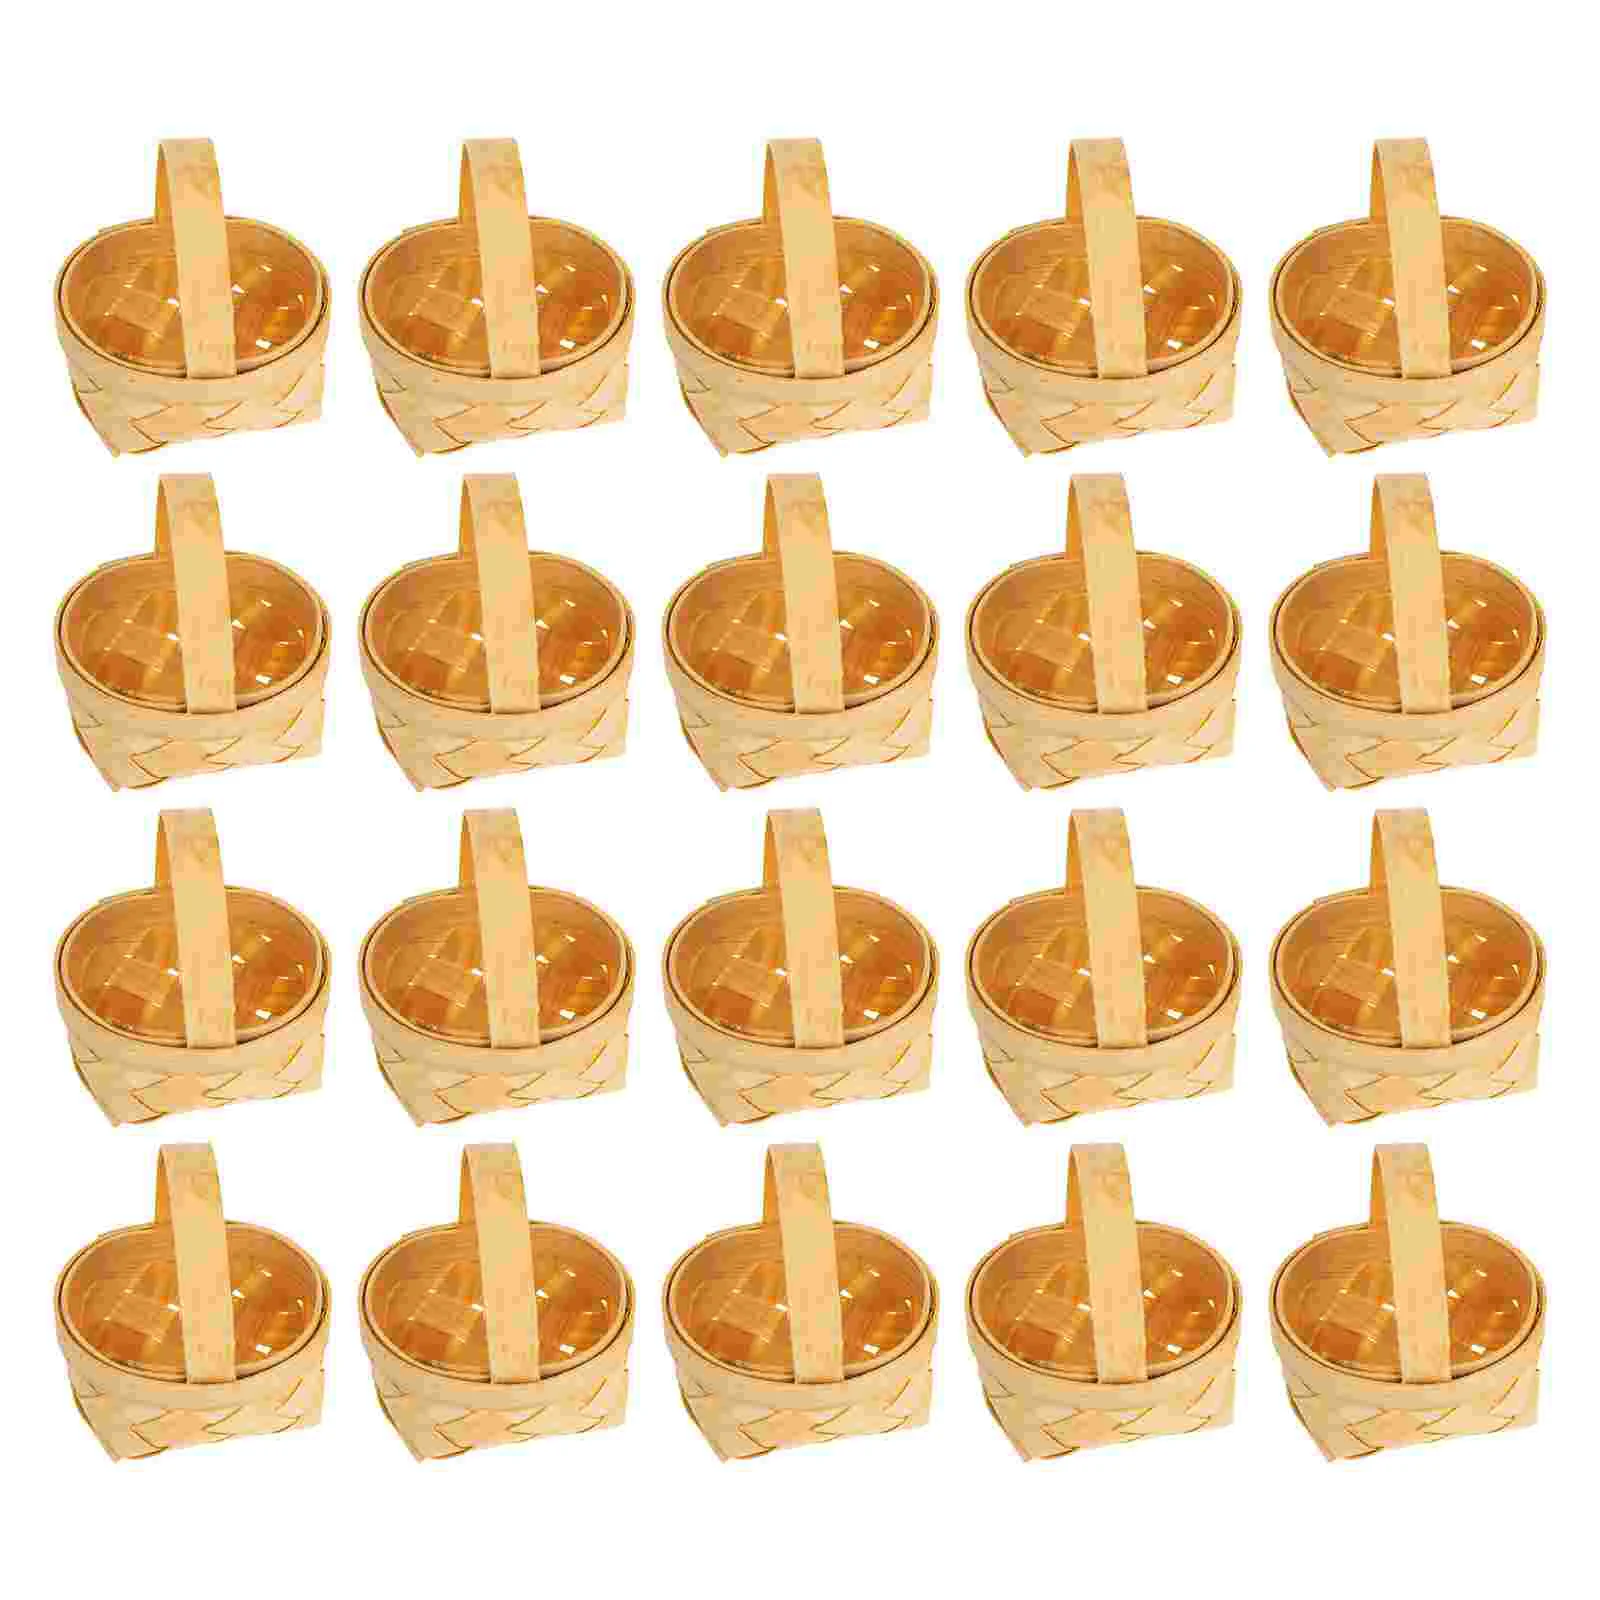 

20 Pcs Wood Chip Candy Hamper Rustic Bread Chocolate Gift Baskets Mini Tote Big Playing House Weaving Wooden Child Gifts